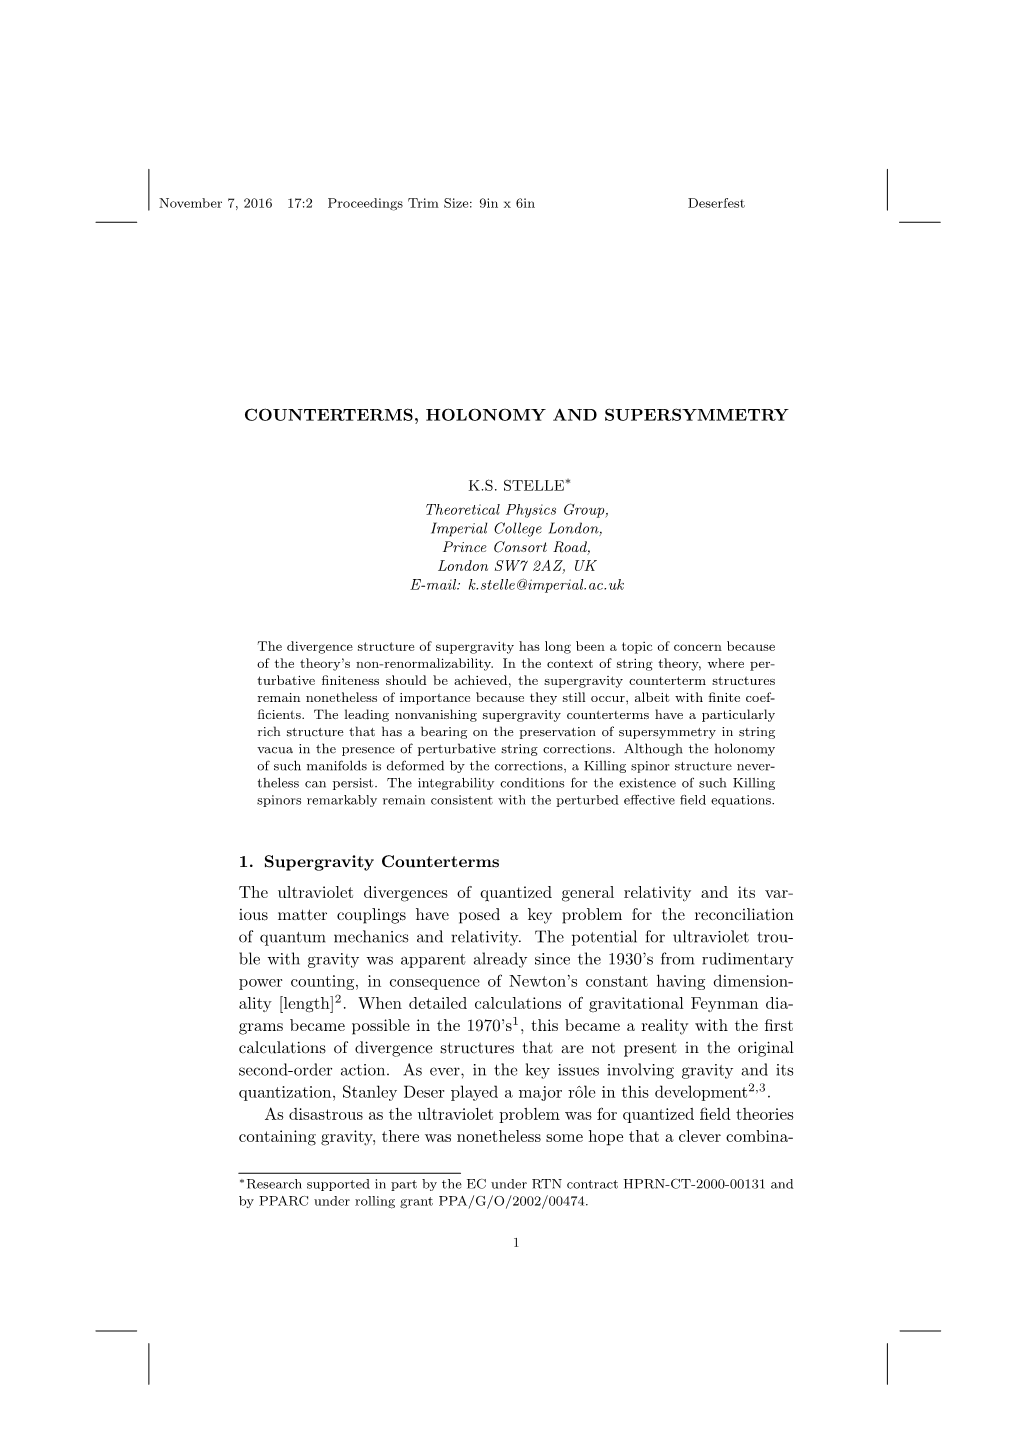 Counterterms, Holonomy and Supersymmetry